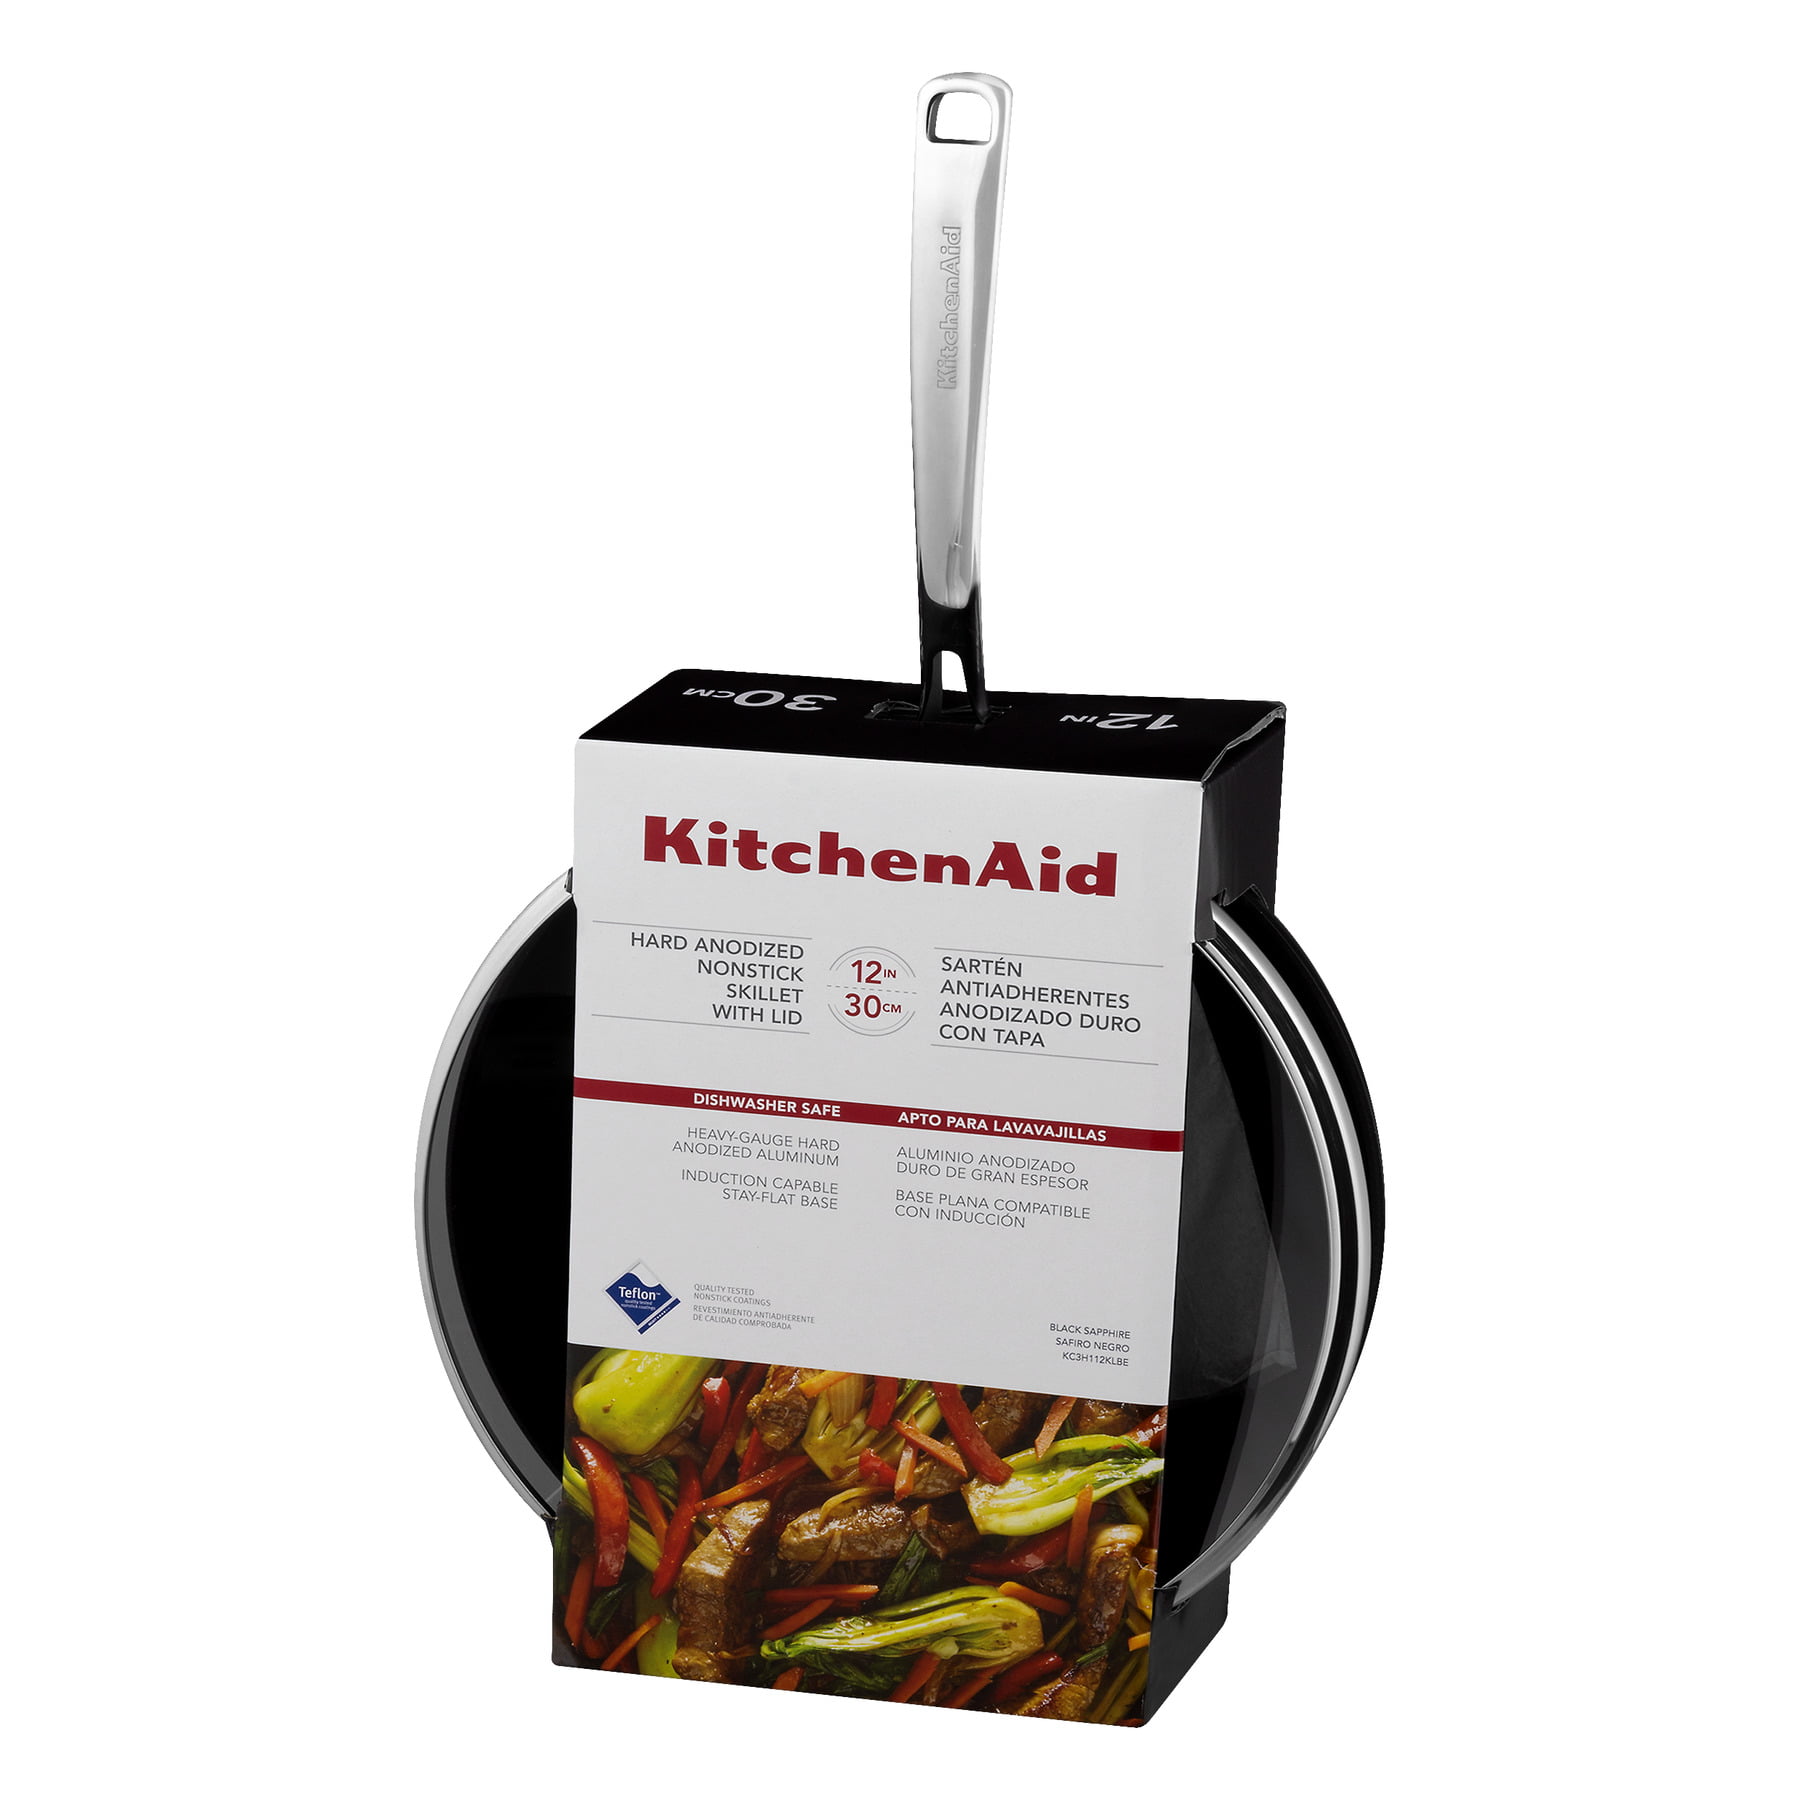 KitchenAid Stainless Steel 12 Nonstick Skillet with lid (KC2S12KNPC) 